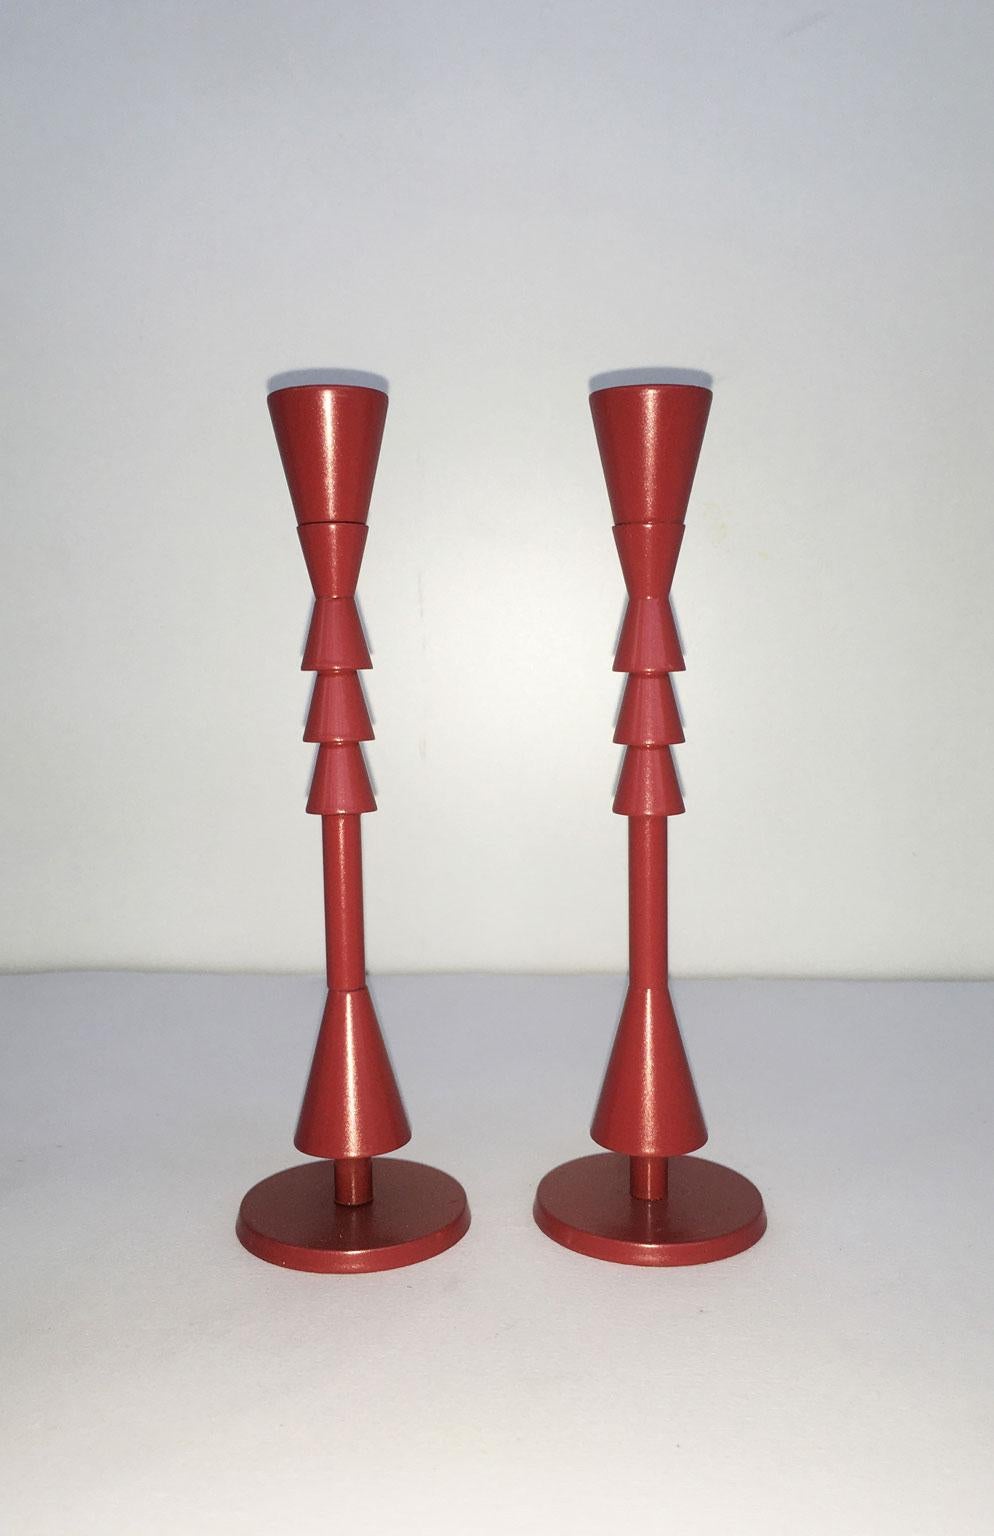 This artwork is a  multiples limited not numbered specimens created by the Italian artist Ugo La Pietra, a well known Internationally artist. This pieces are useful as candleholders.

Ugo La Pietra was born in Bussi Sul Tirino (Italy) in 1938.